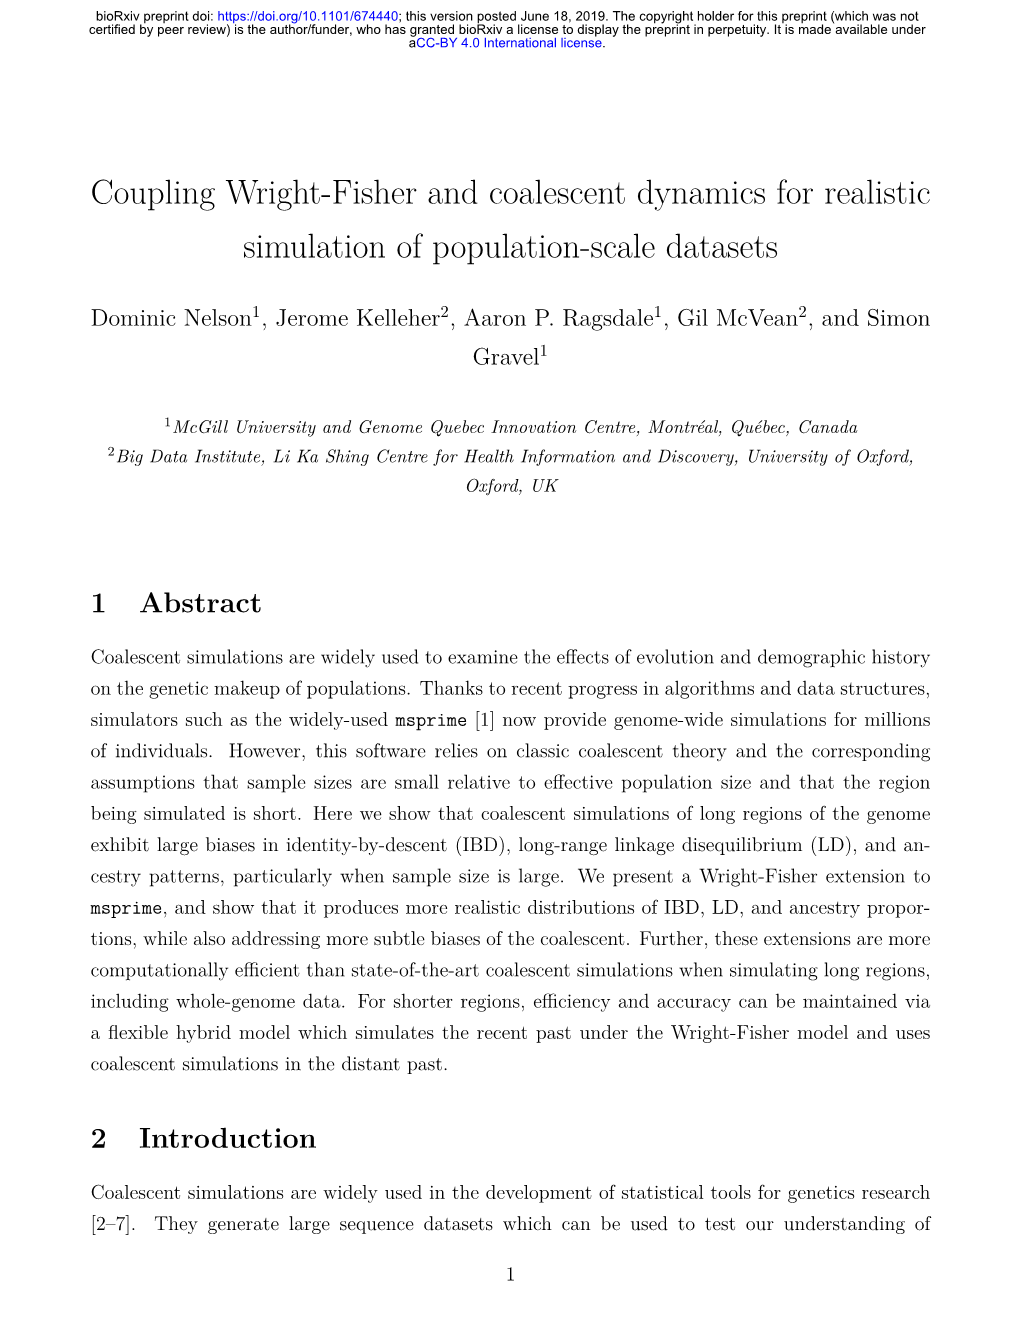 Coupling Wright-Fisher and Coalescent Dynamics for Realistic Simulation of Population-Scale Datasets